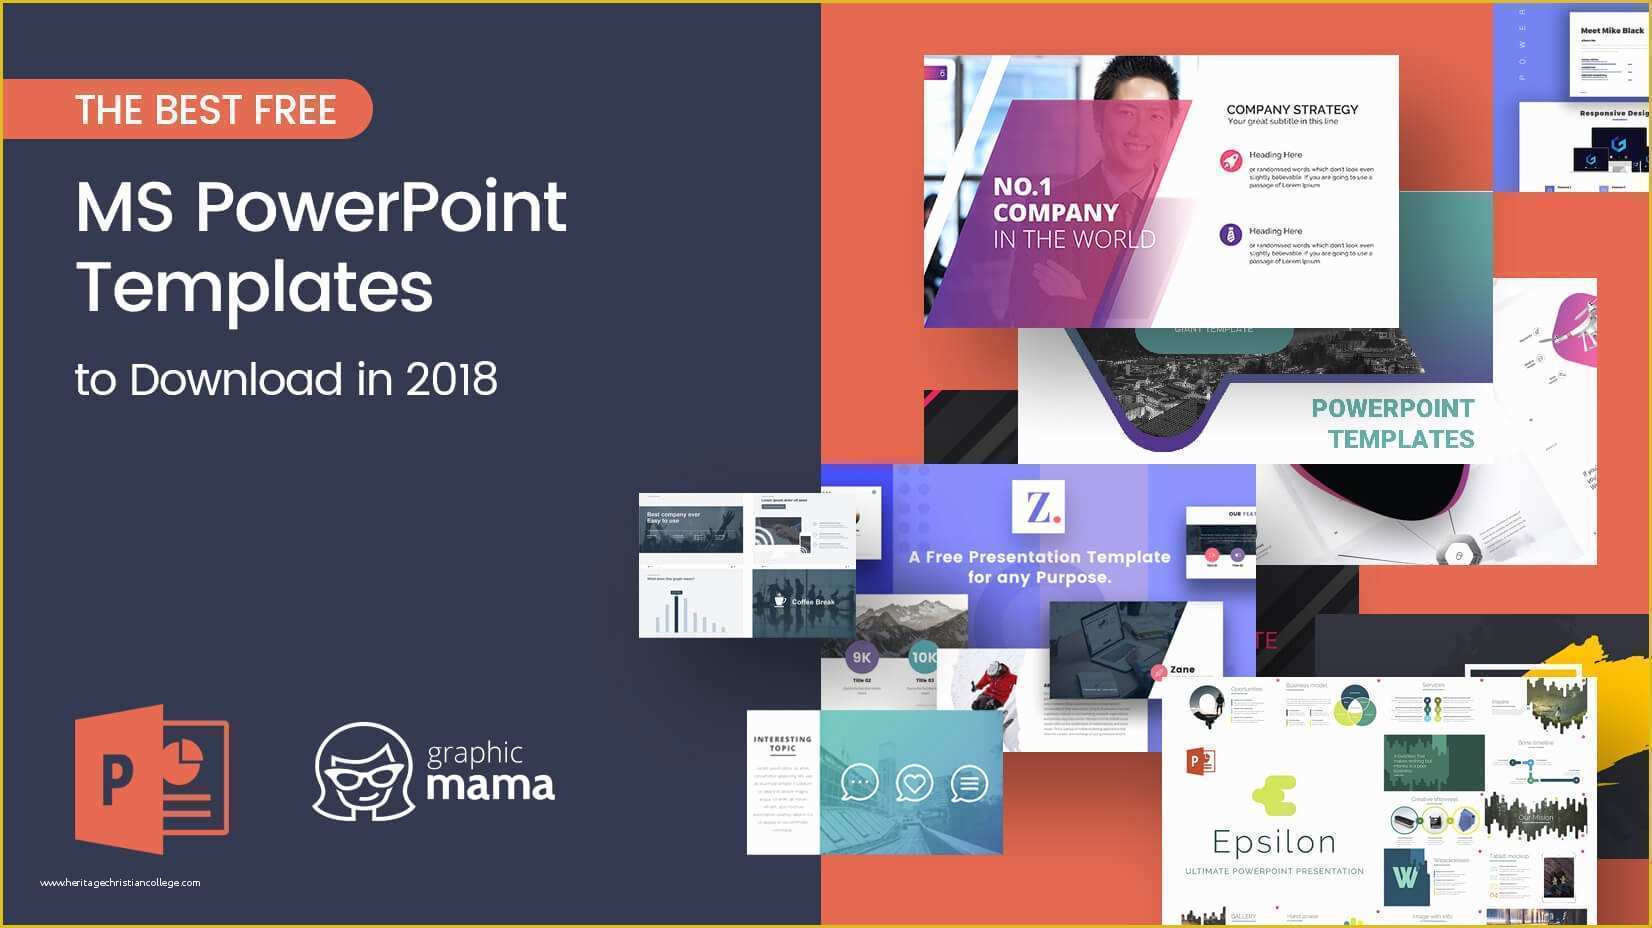 Creative Powerpoint Templates Free Of the Best Free Powerpoint Templates to Download In 2018